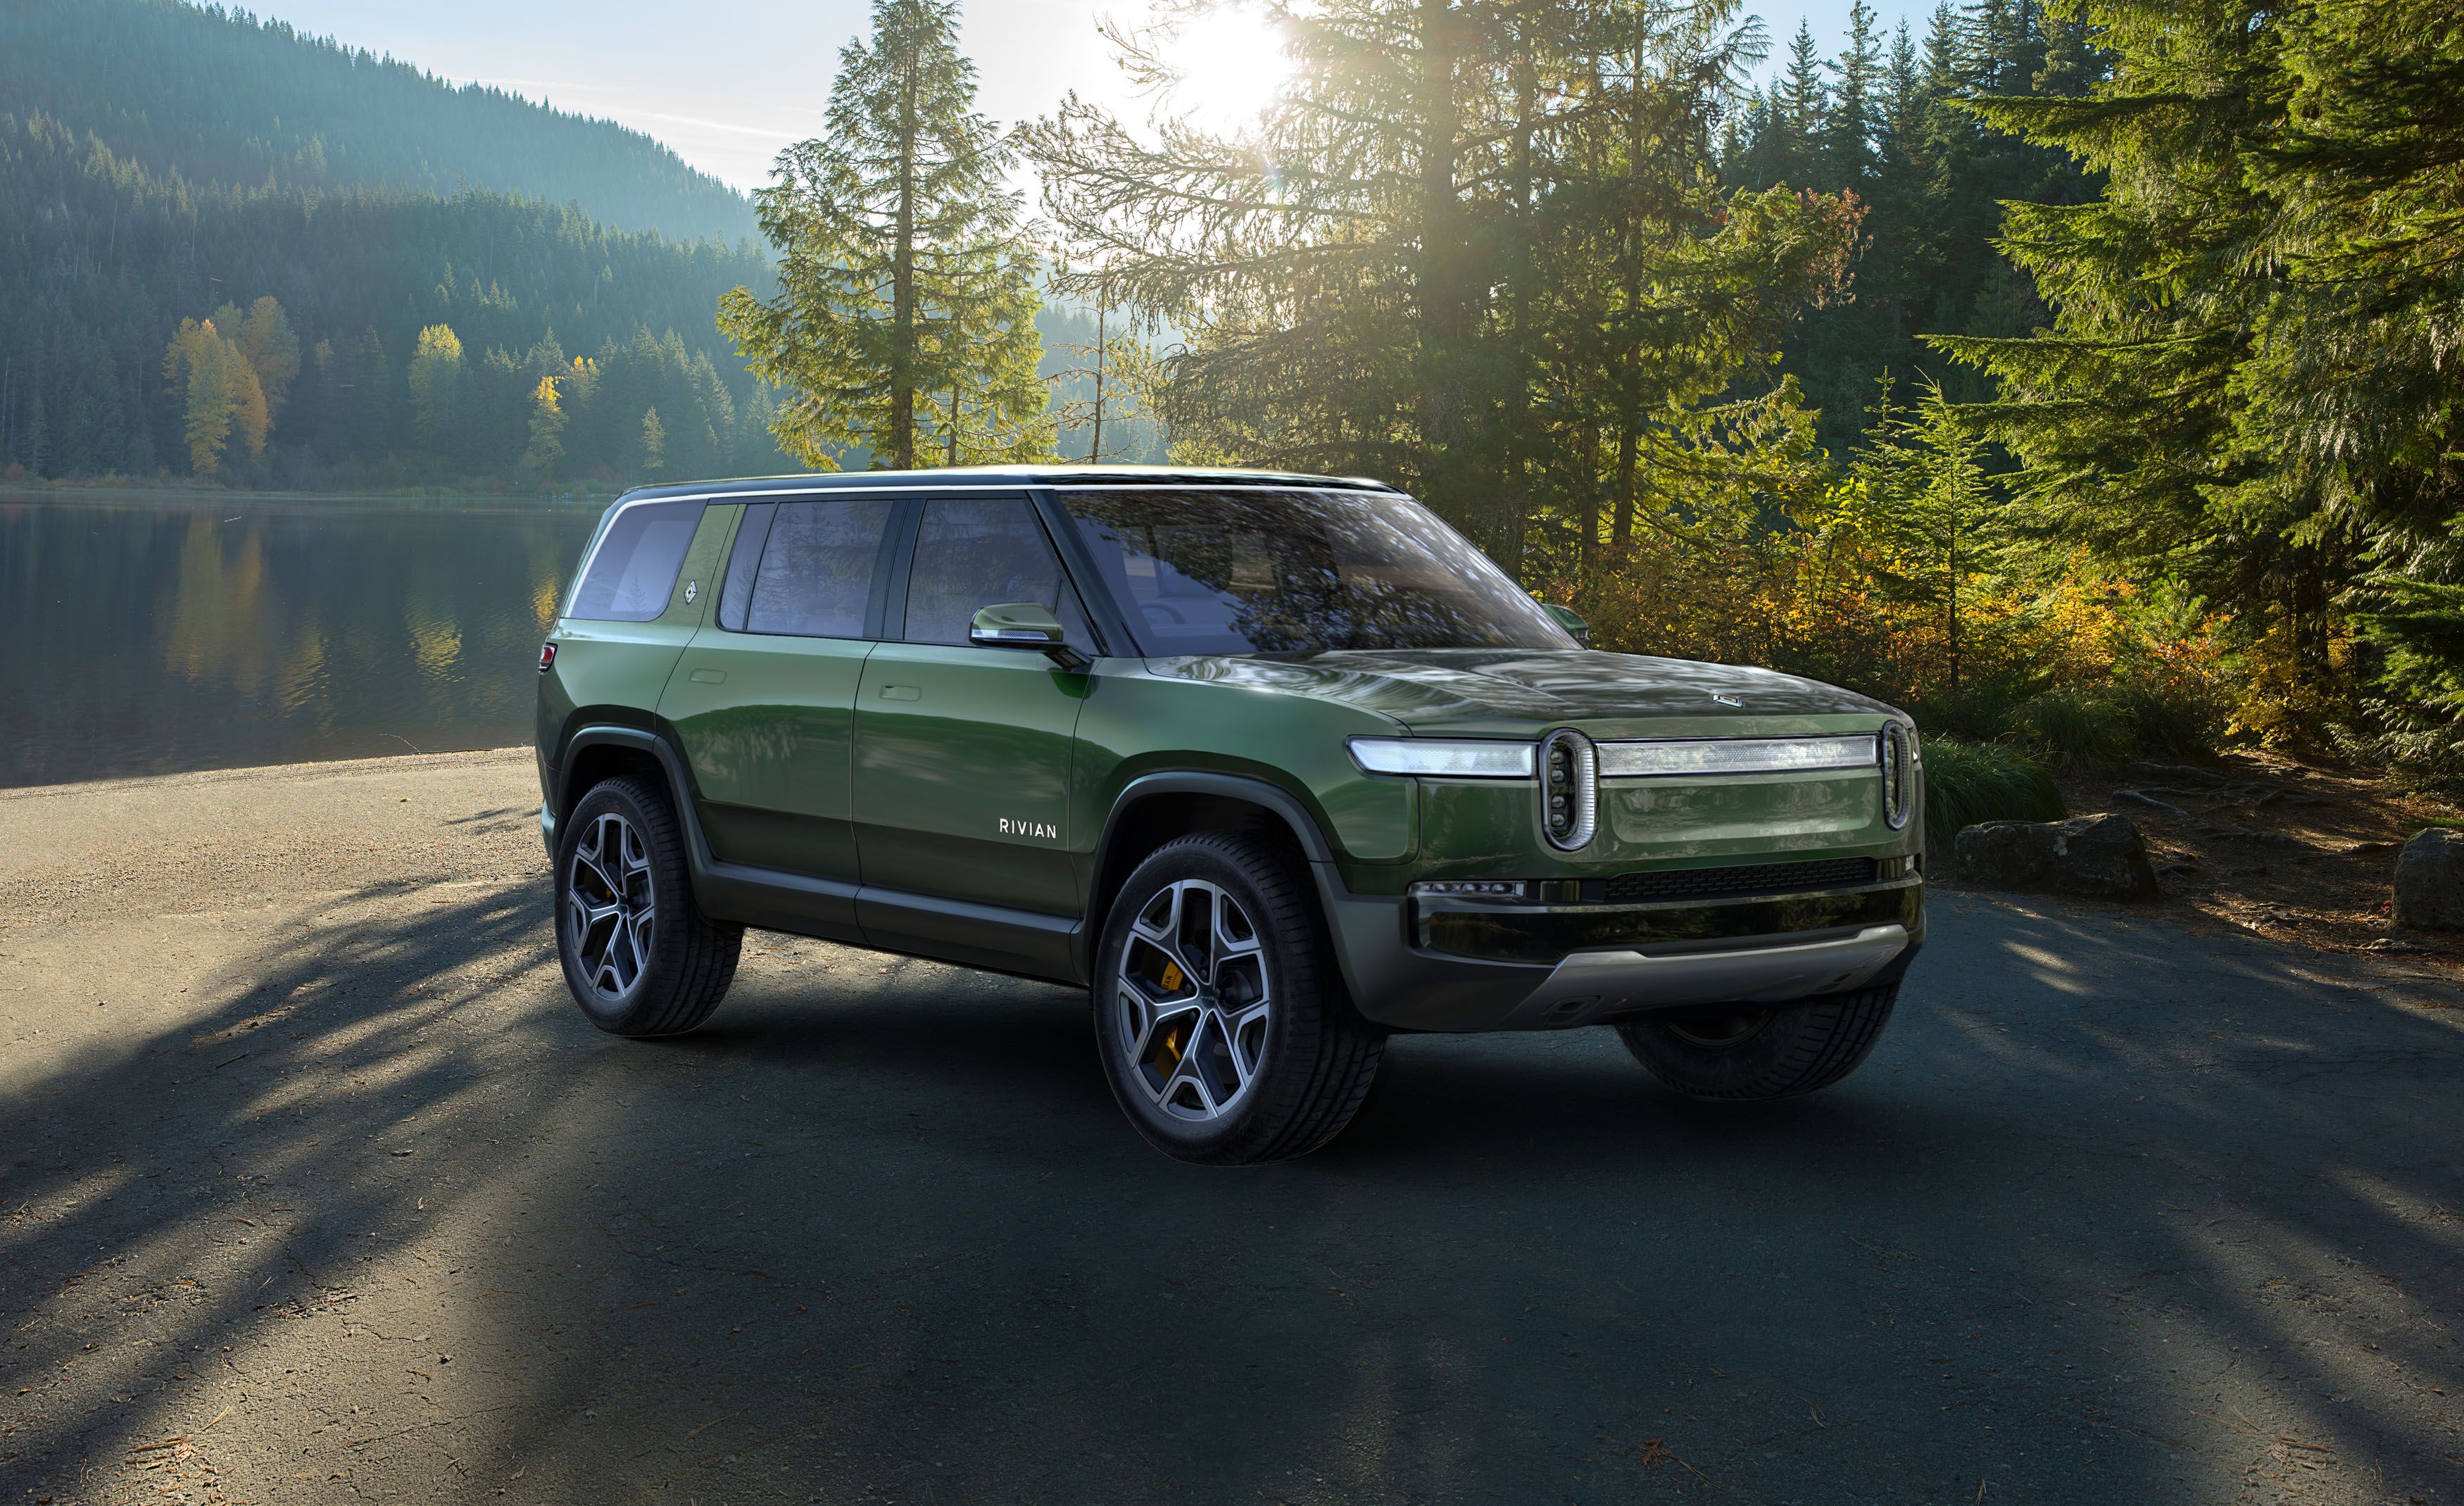 2022 Rivian R1S SUV Specs, Details, and Release Date